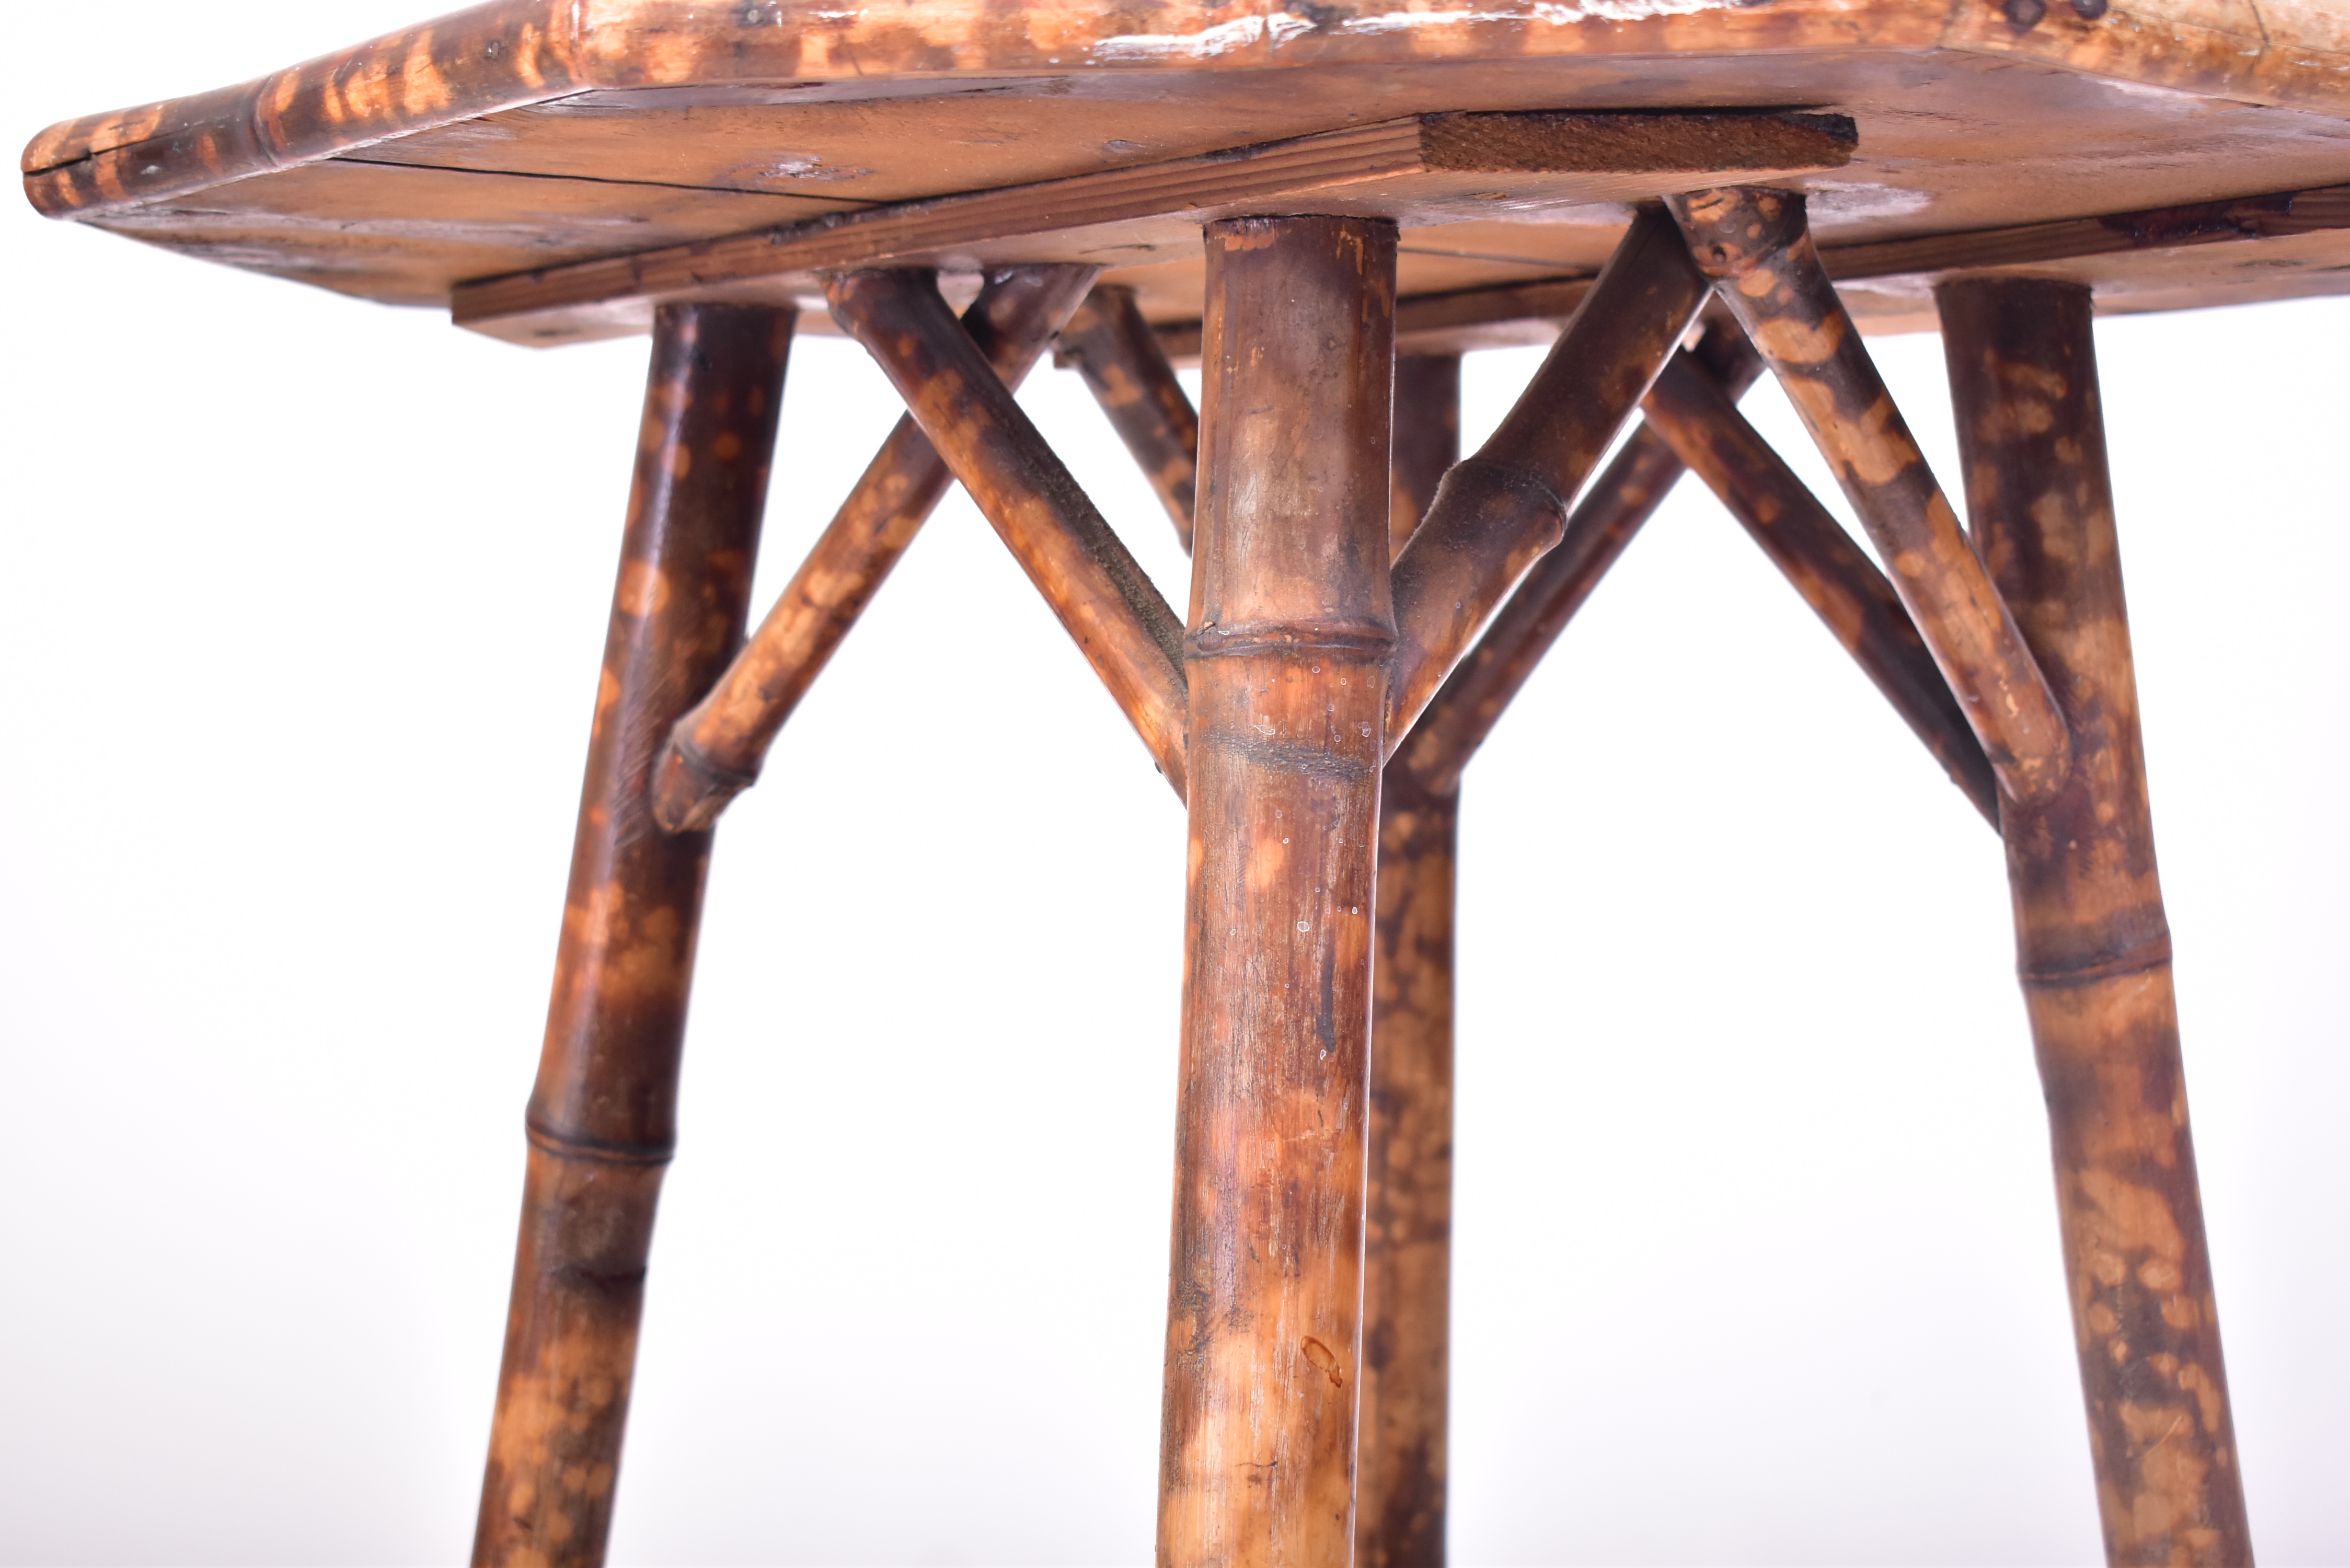 19TH CENTURY AESTHETIC MOVEMENT BAMBOO TABLE - Image 4 of 4